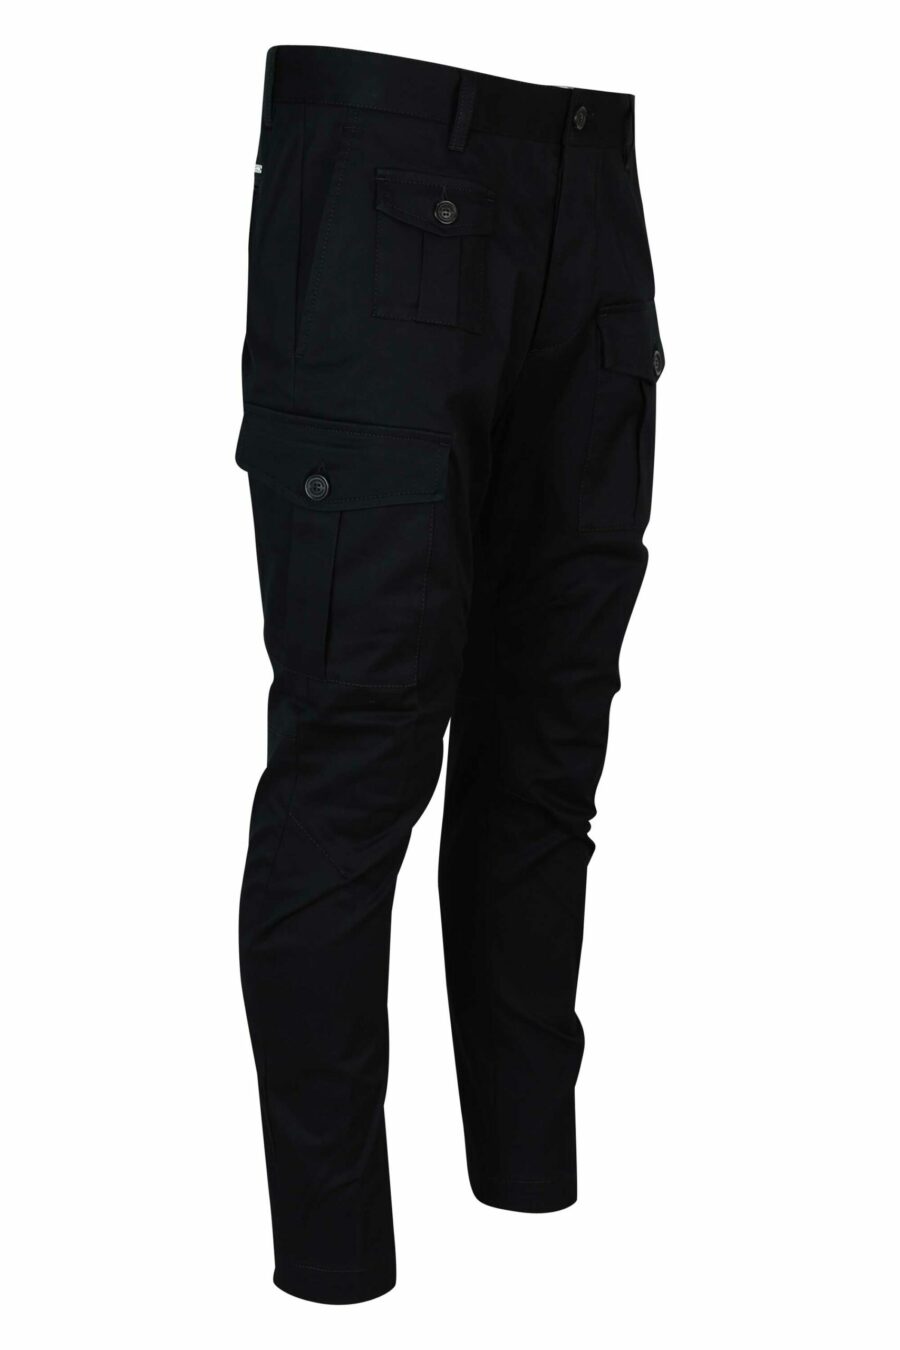 Black cargo trousers "sexy cargo" - 8054148389000 1 scaled